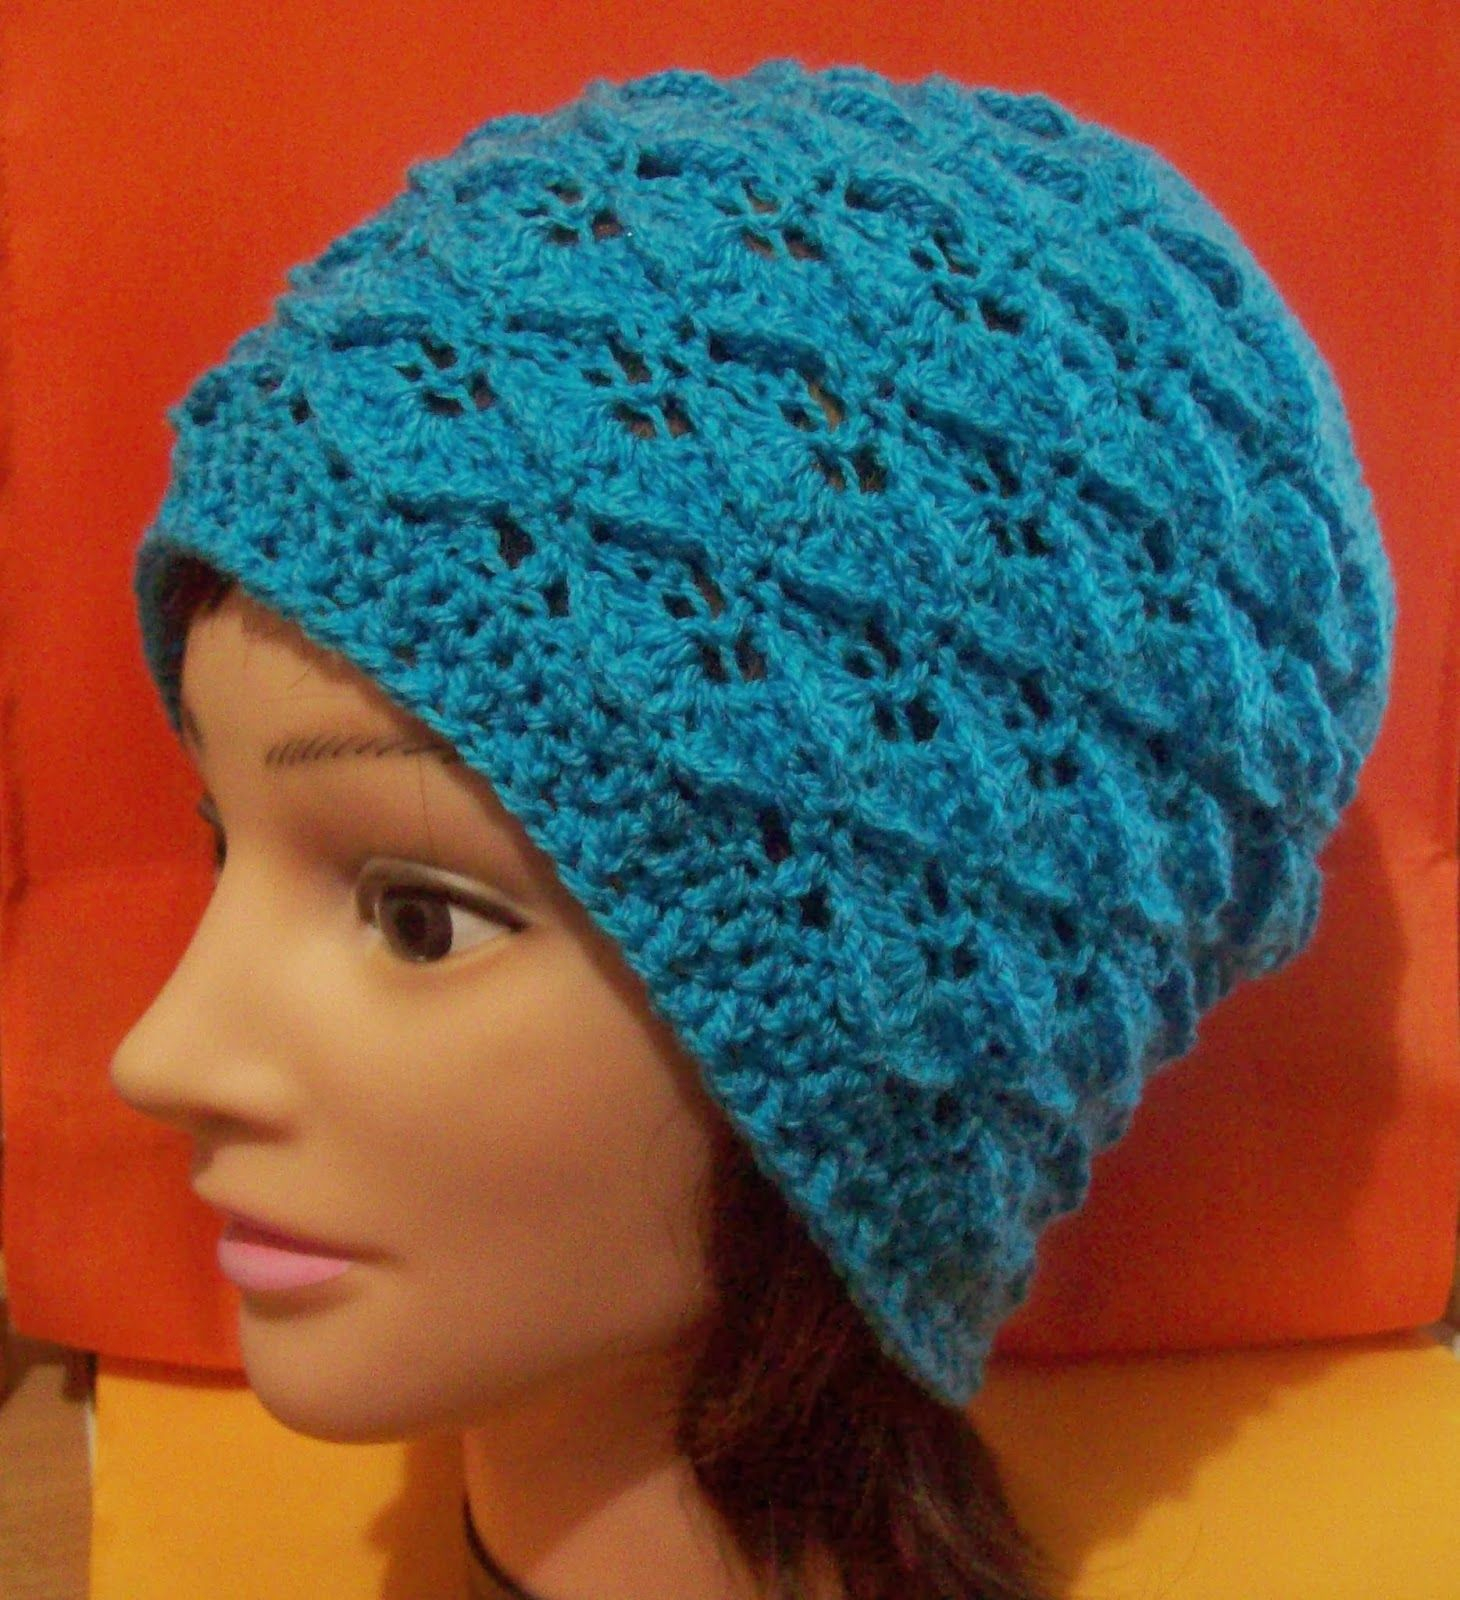 Free Crochet Hat Patterns For Adults The Dragon Scale Adult Hat Free Crochet Pattern Projects To